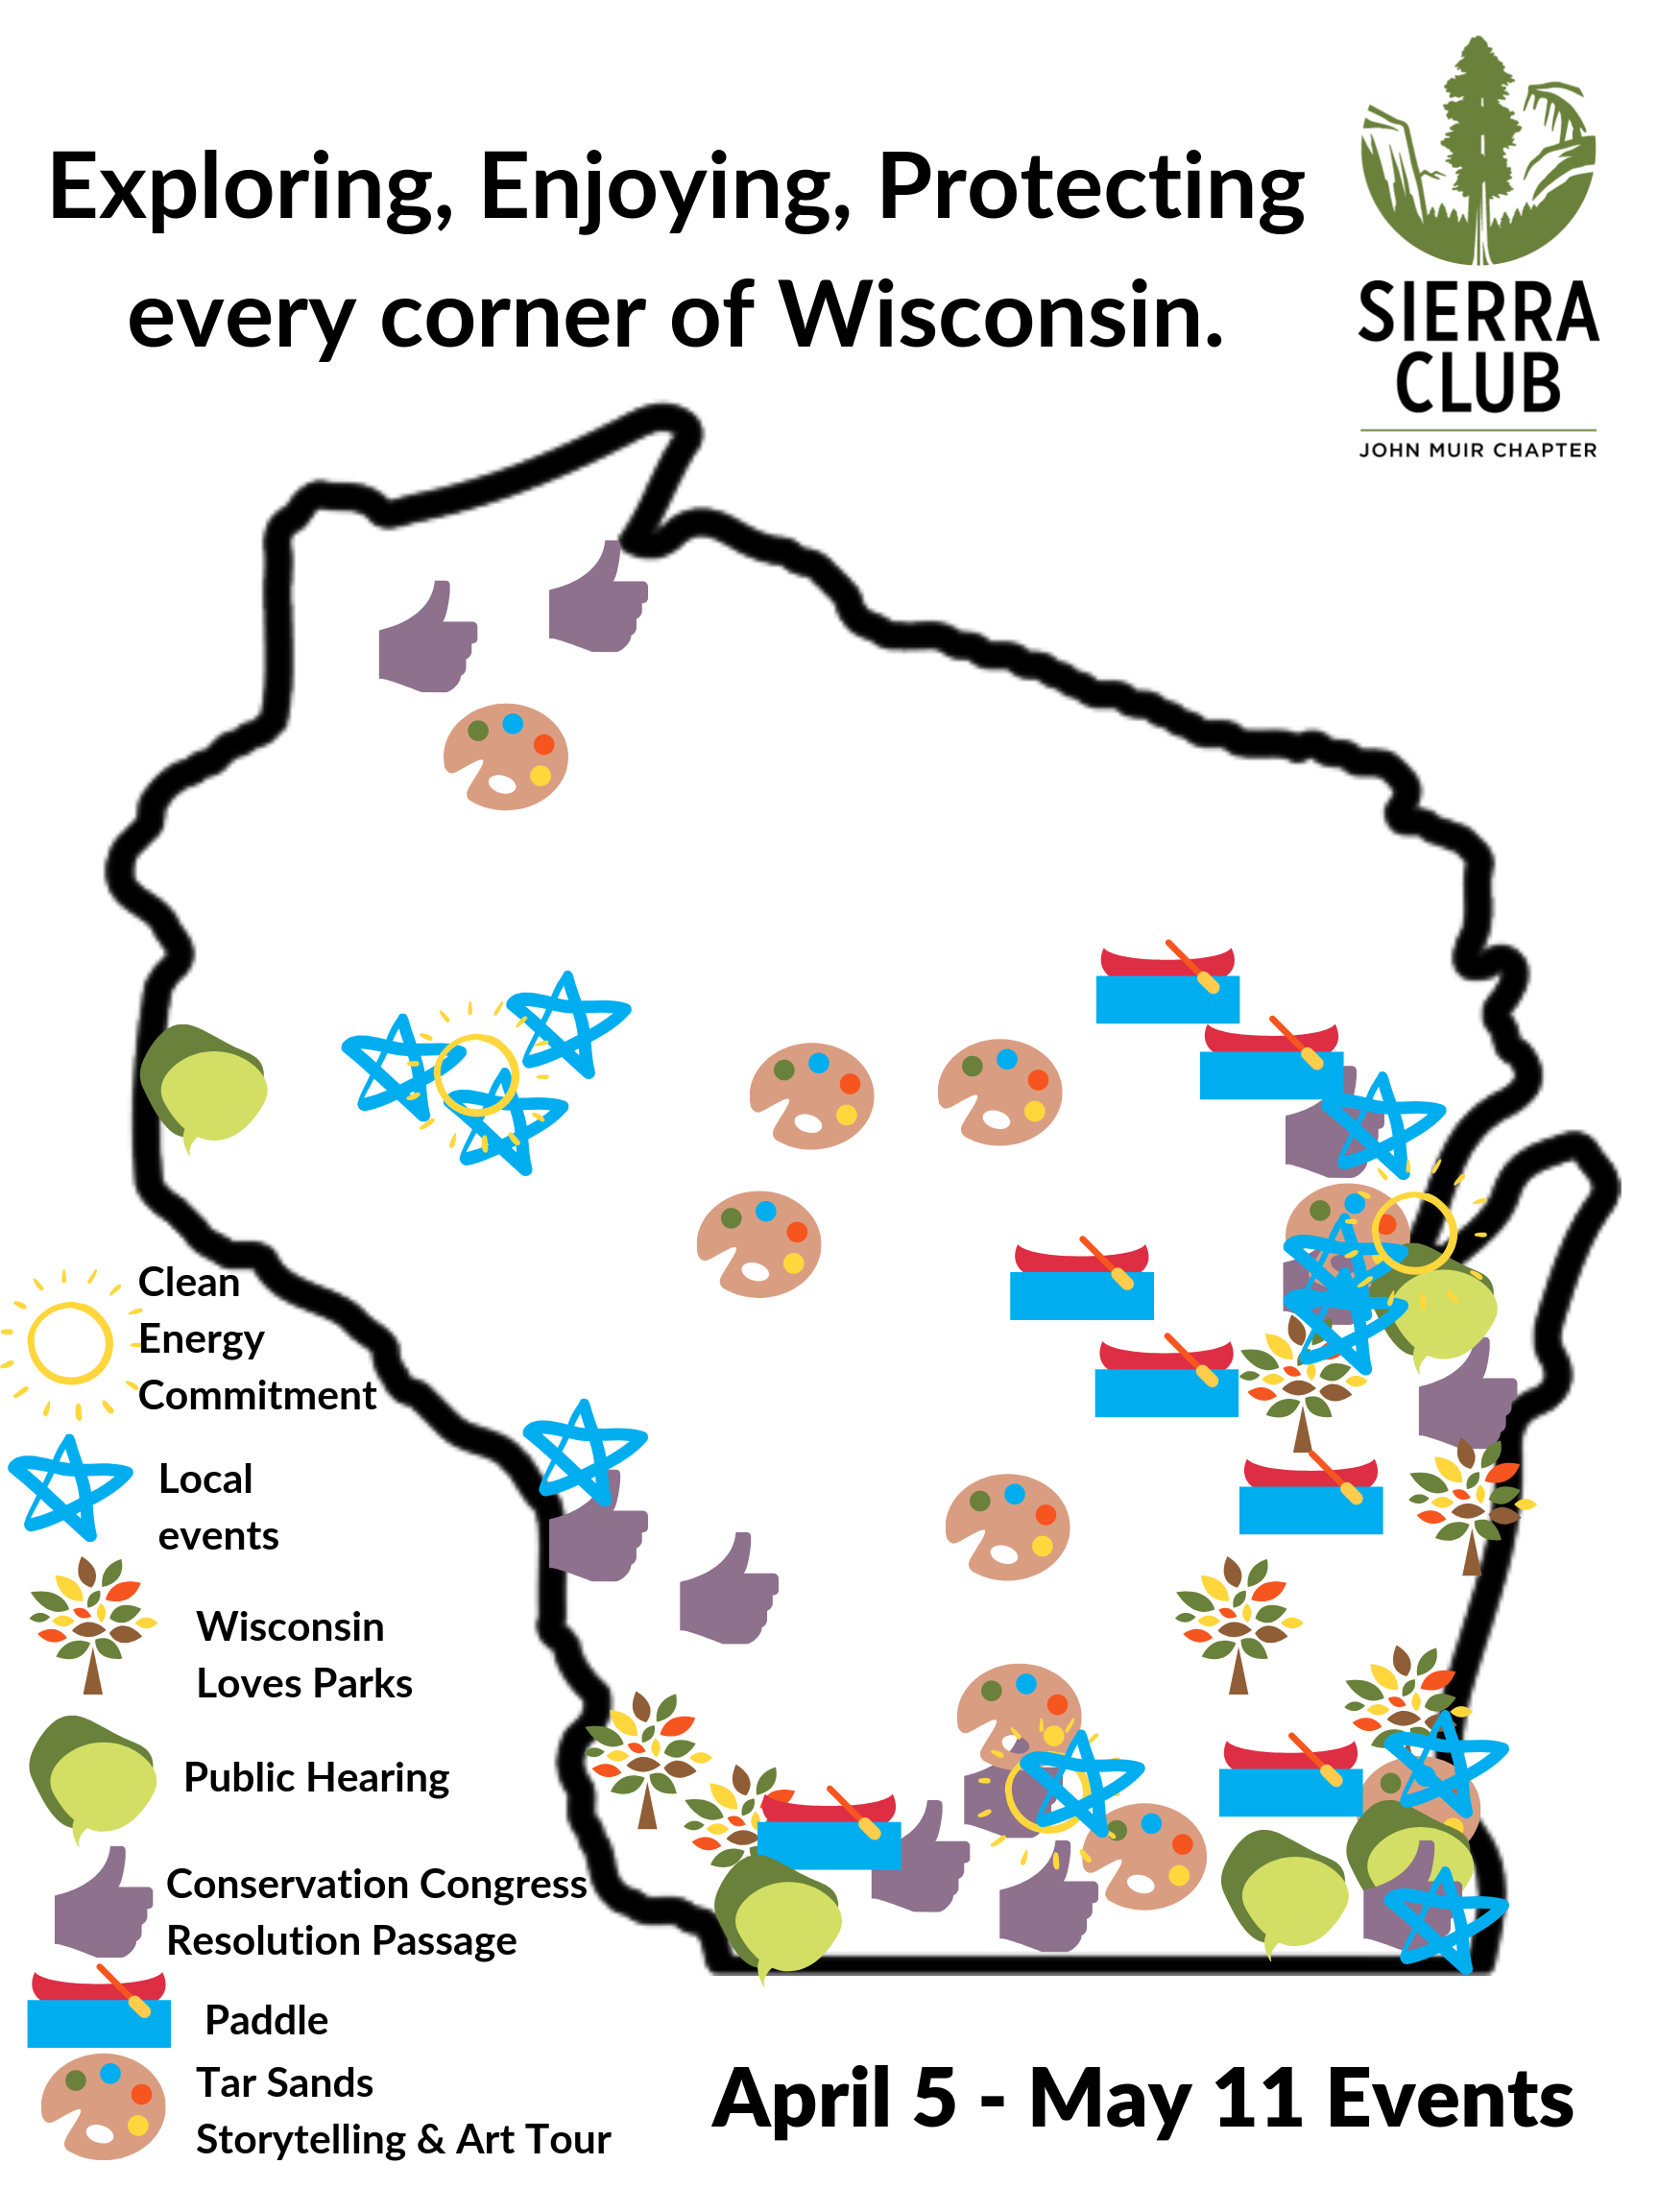 Map of Wisconsin showing event locations